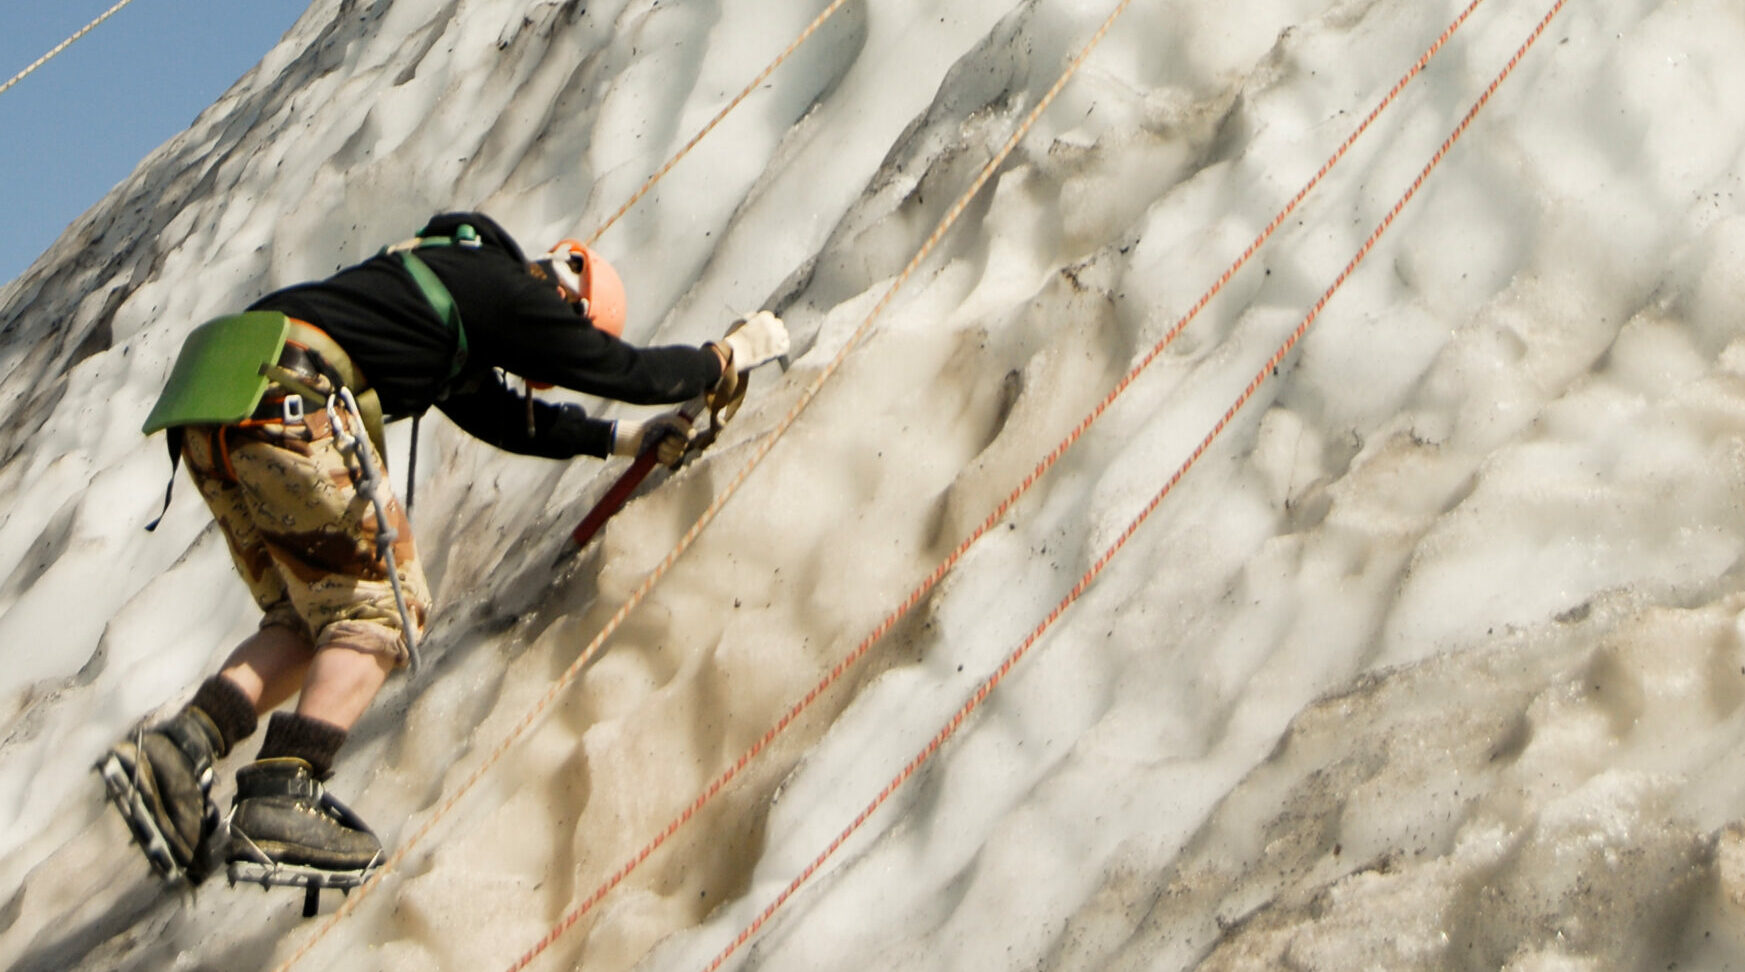 A climber tying a figure-eight knot, an essential skill for safe rappelling.